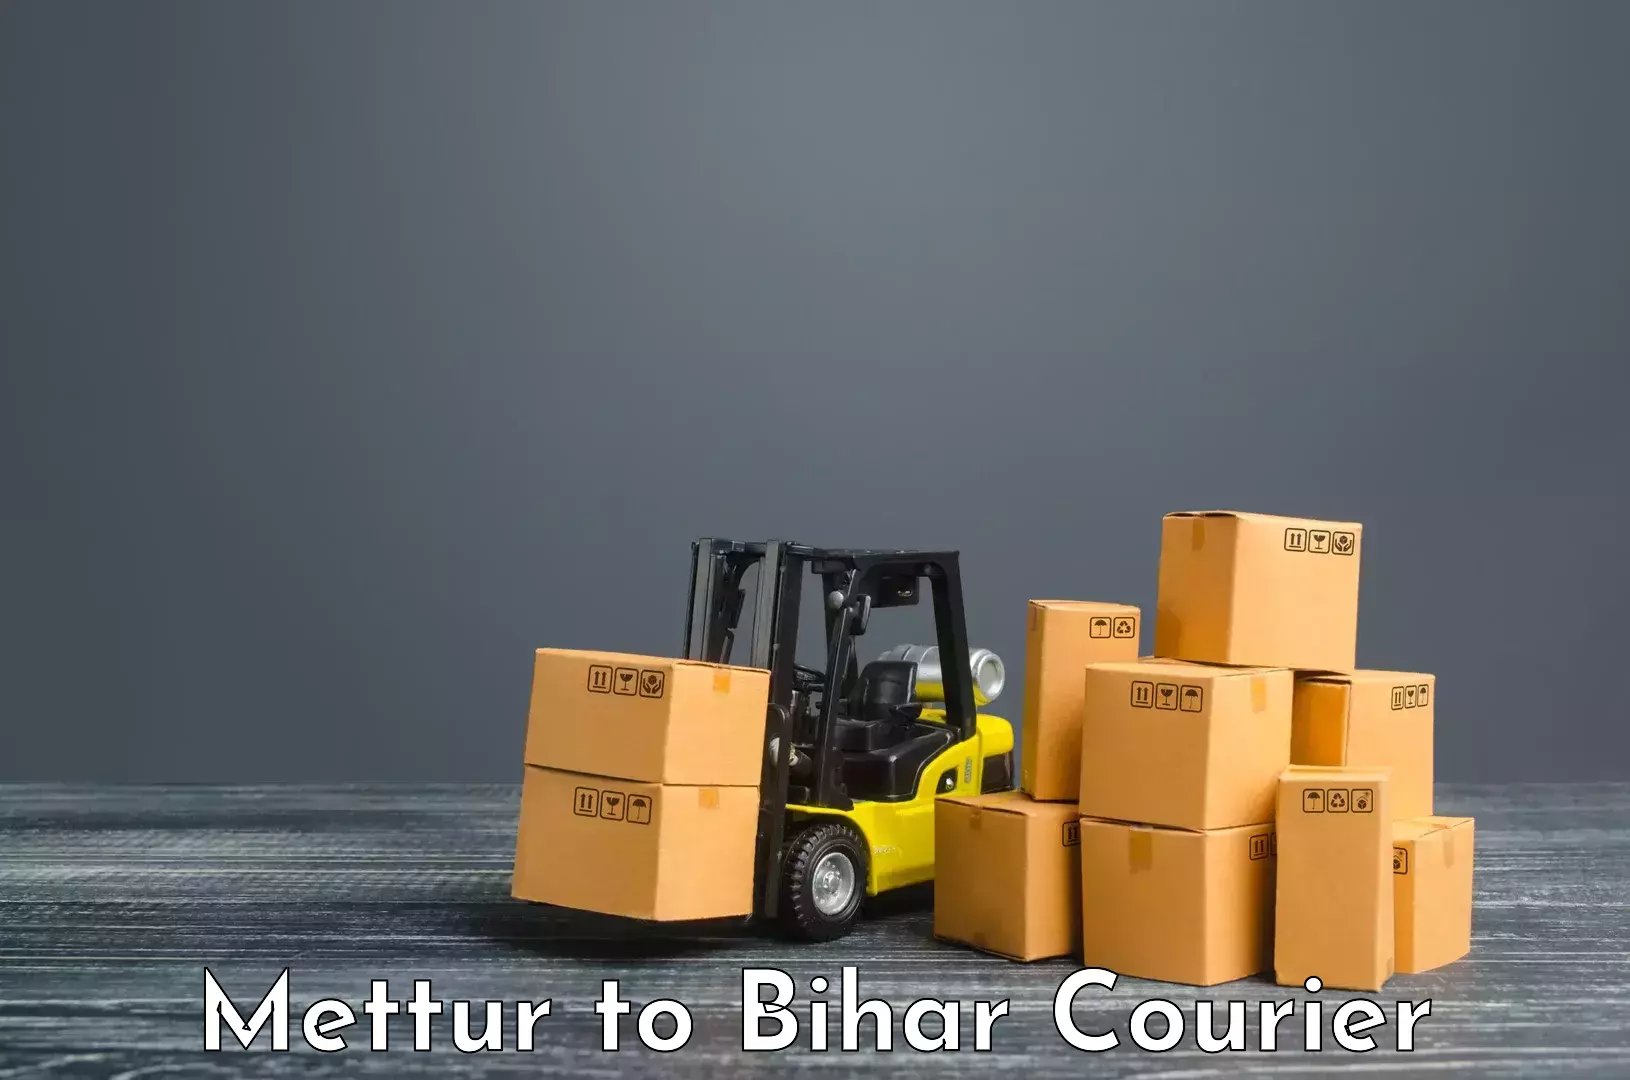 Global courier networks Mettur to Sultanganj